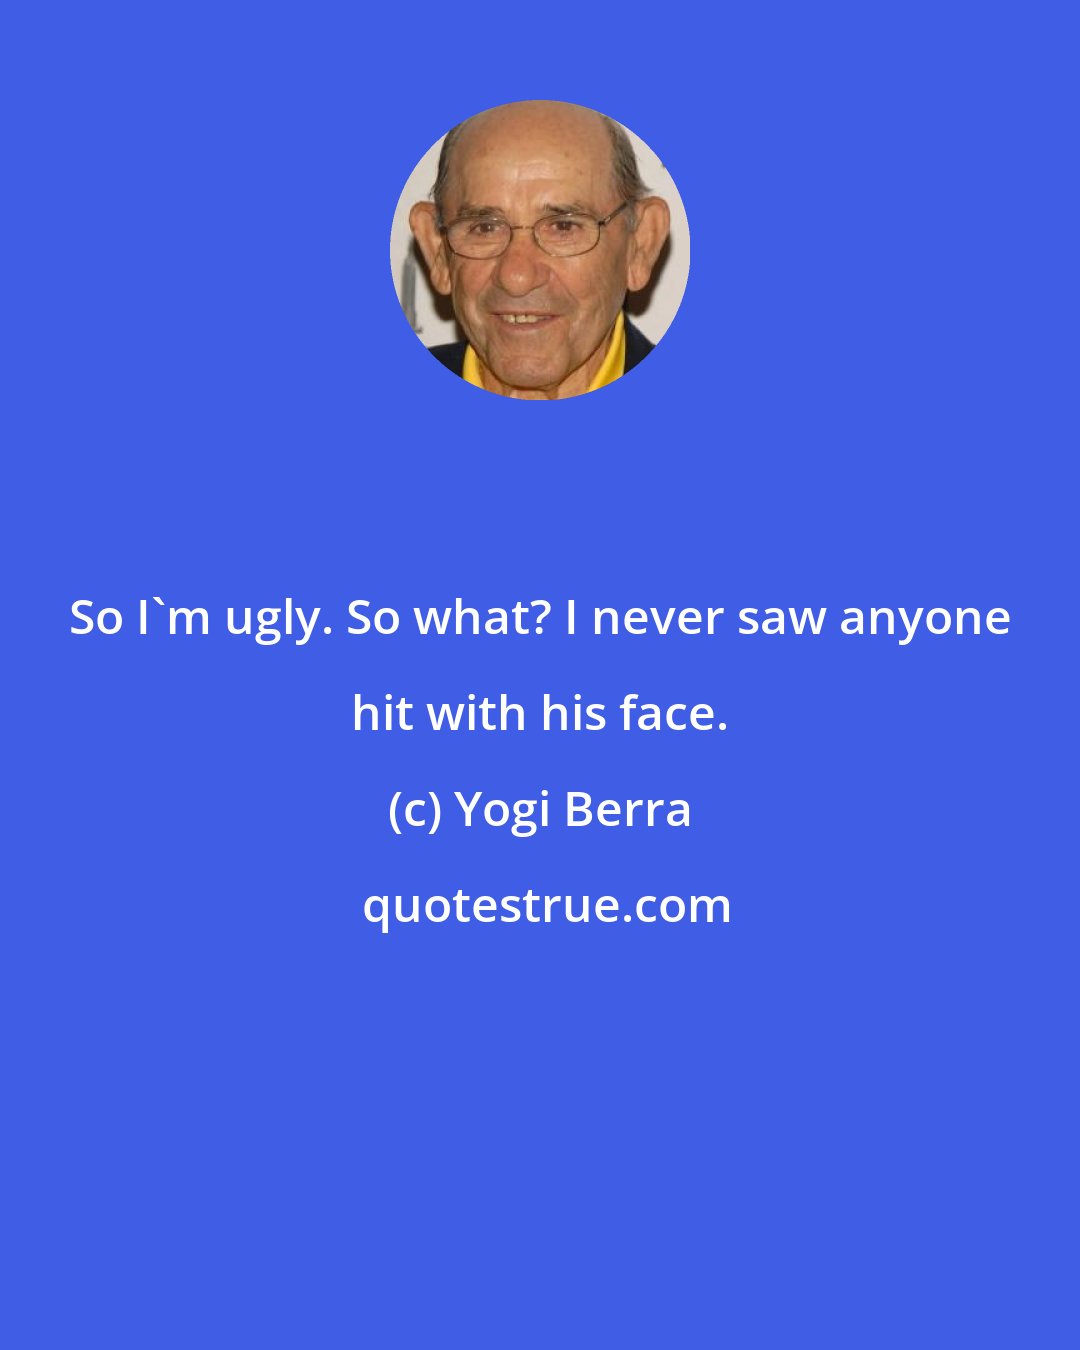 Yogi Berra: So I'm ugly. So what? I never saw anyone hit with his face.